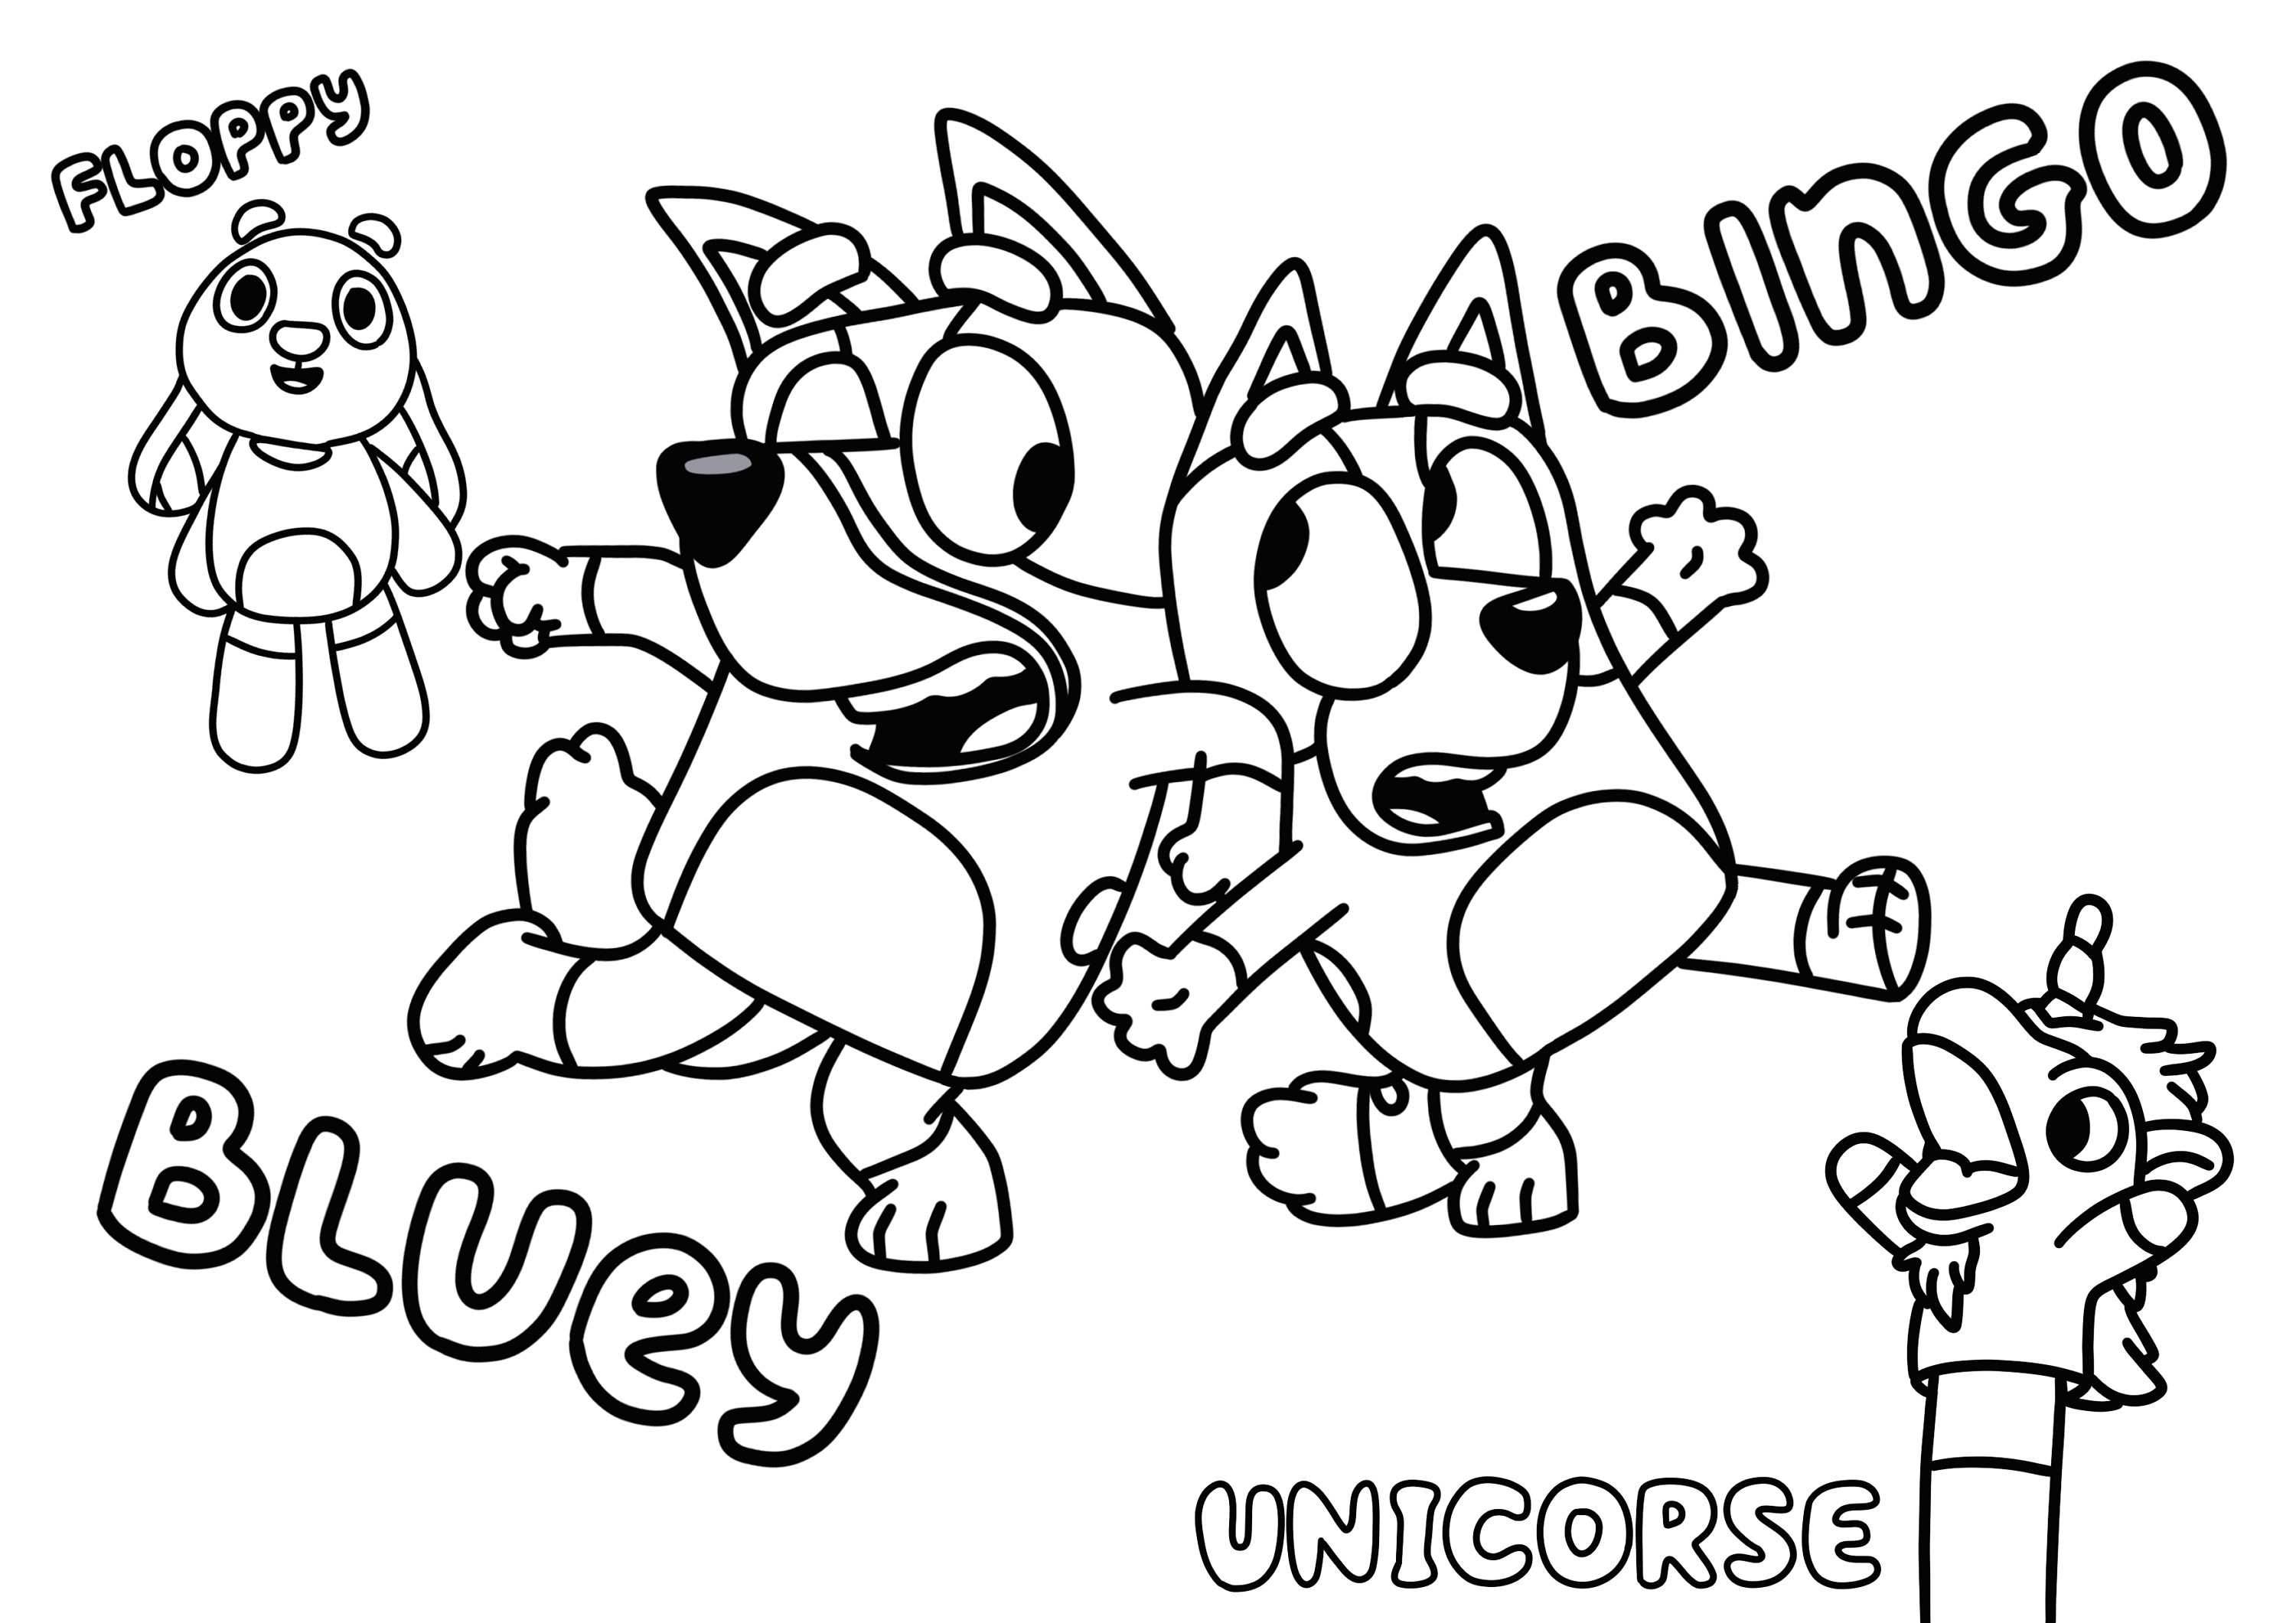 Bluey and Bingo Colouring Page - Etsy